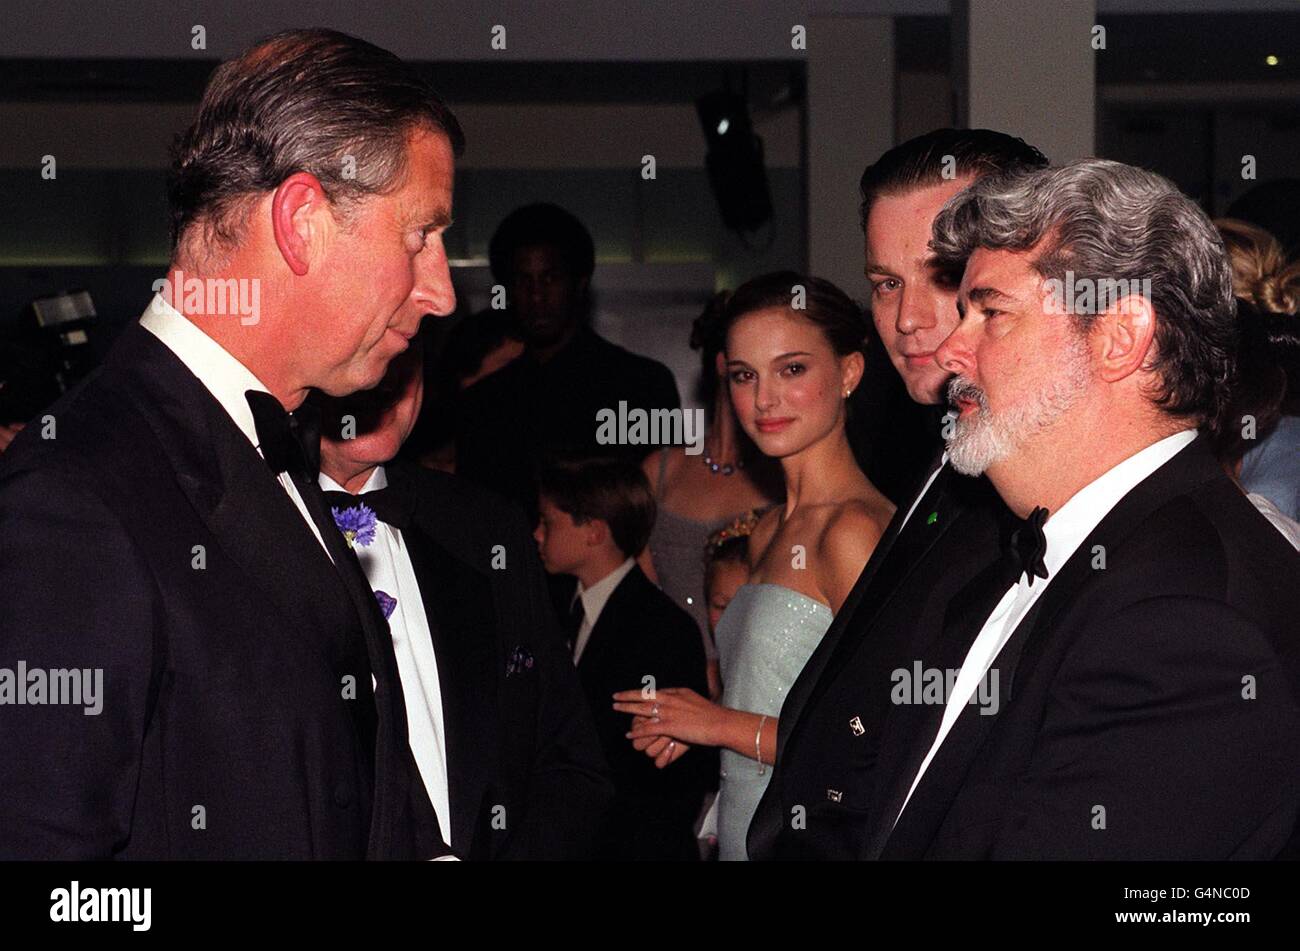 Prince Charles (L) greets director George Lucas (R), while stars Ewan (2nd R) McGregor and Natalie Portman (3rd R) look on at the Royal Premiere of Star Wars: Episode 1, The Phantom Menace, at Leicester Square, London. Stock Photo